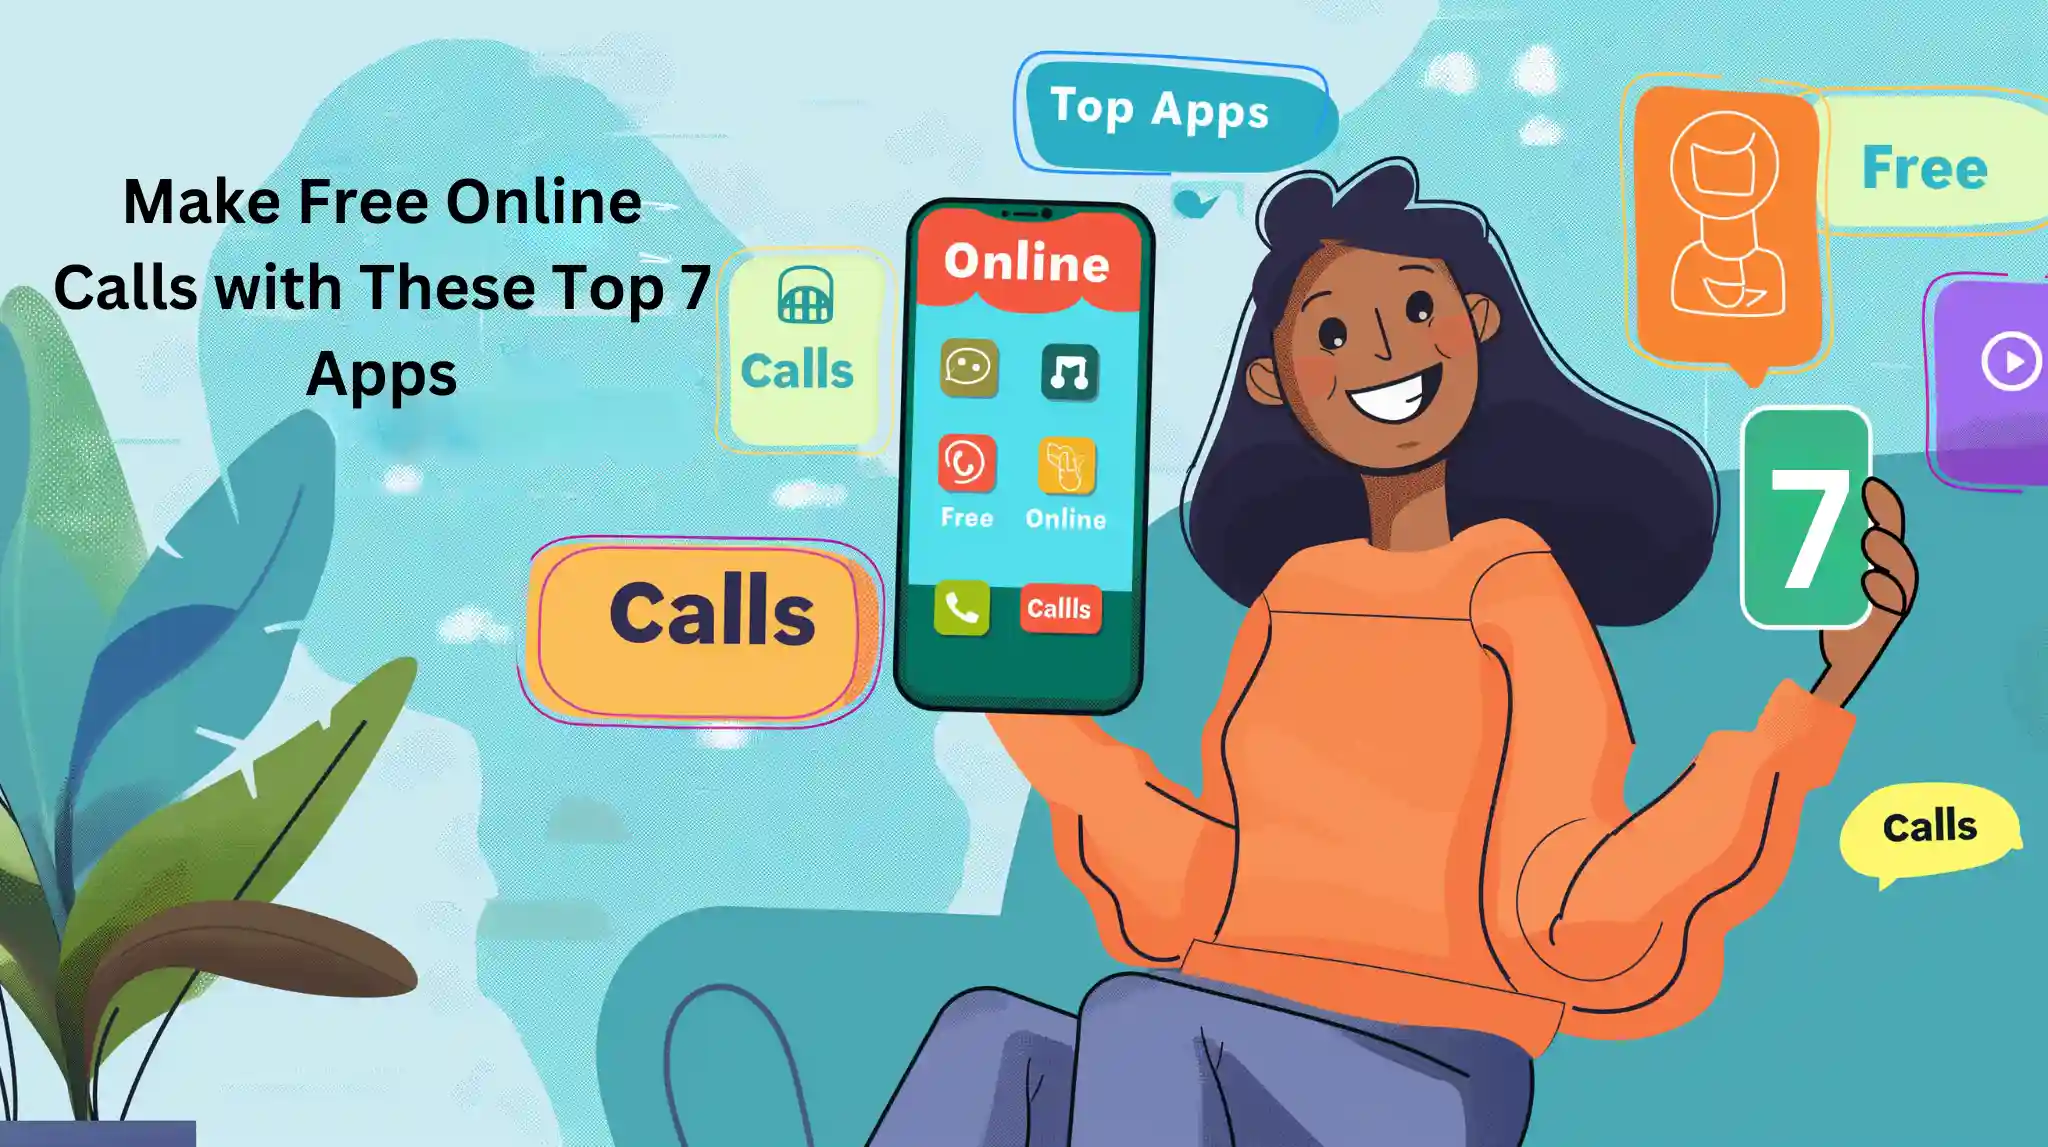 Free Online Calls with These Top 7 Apps